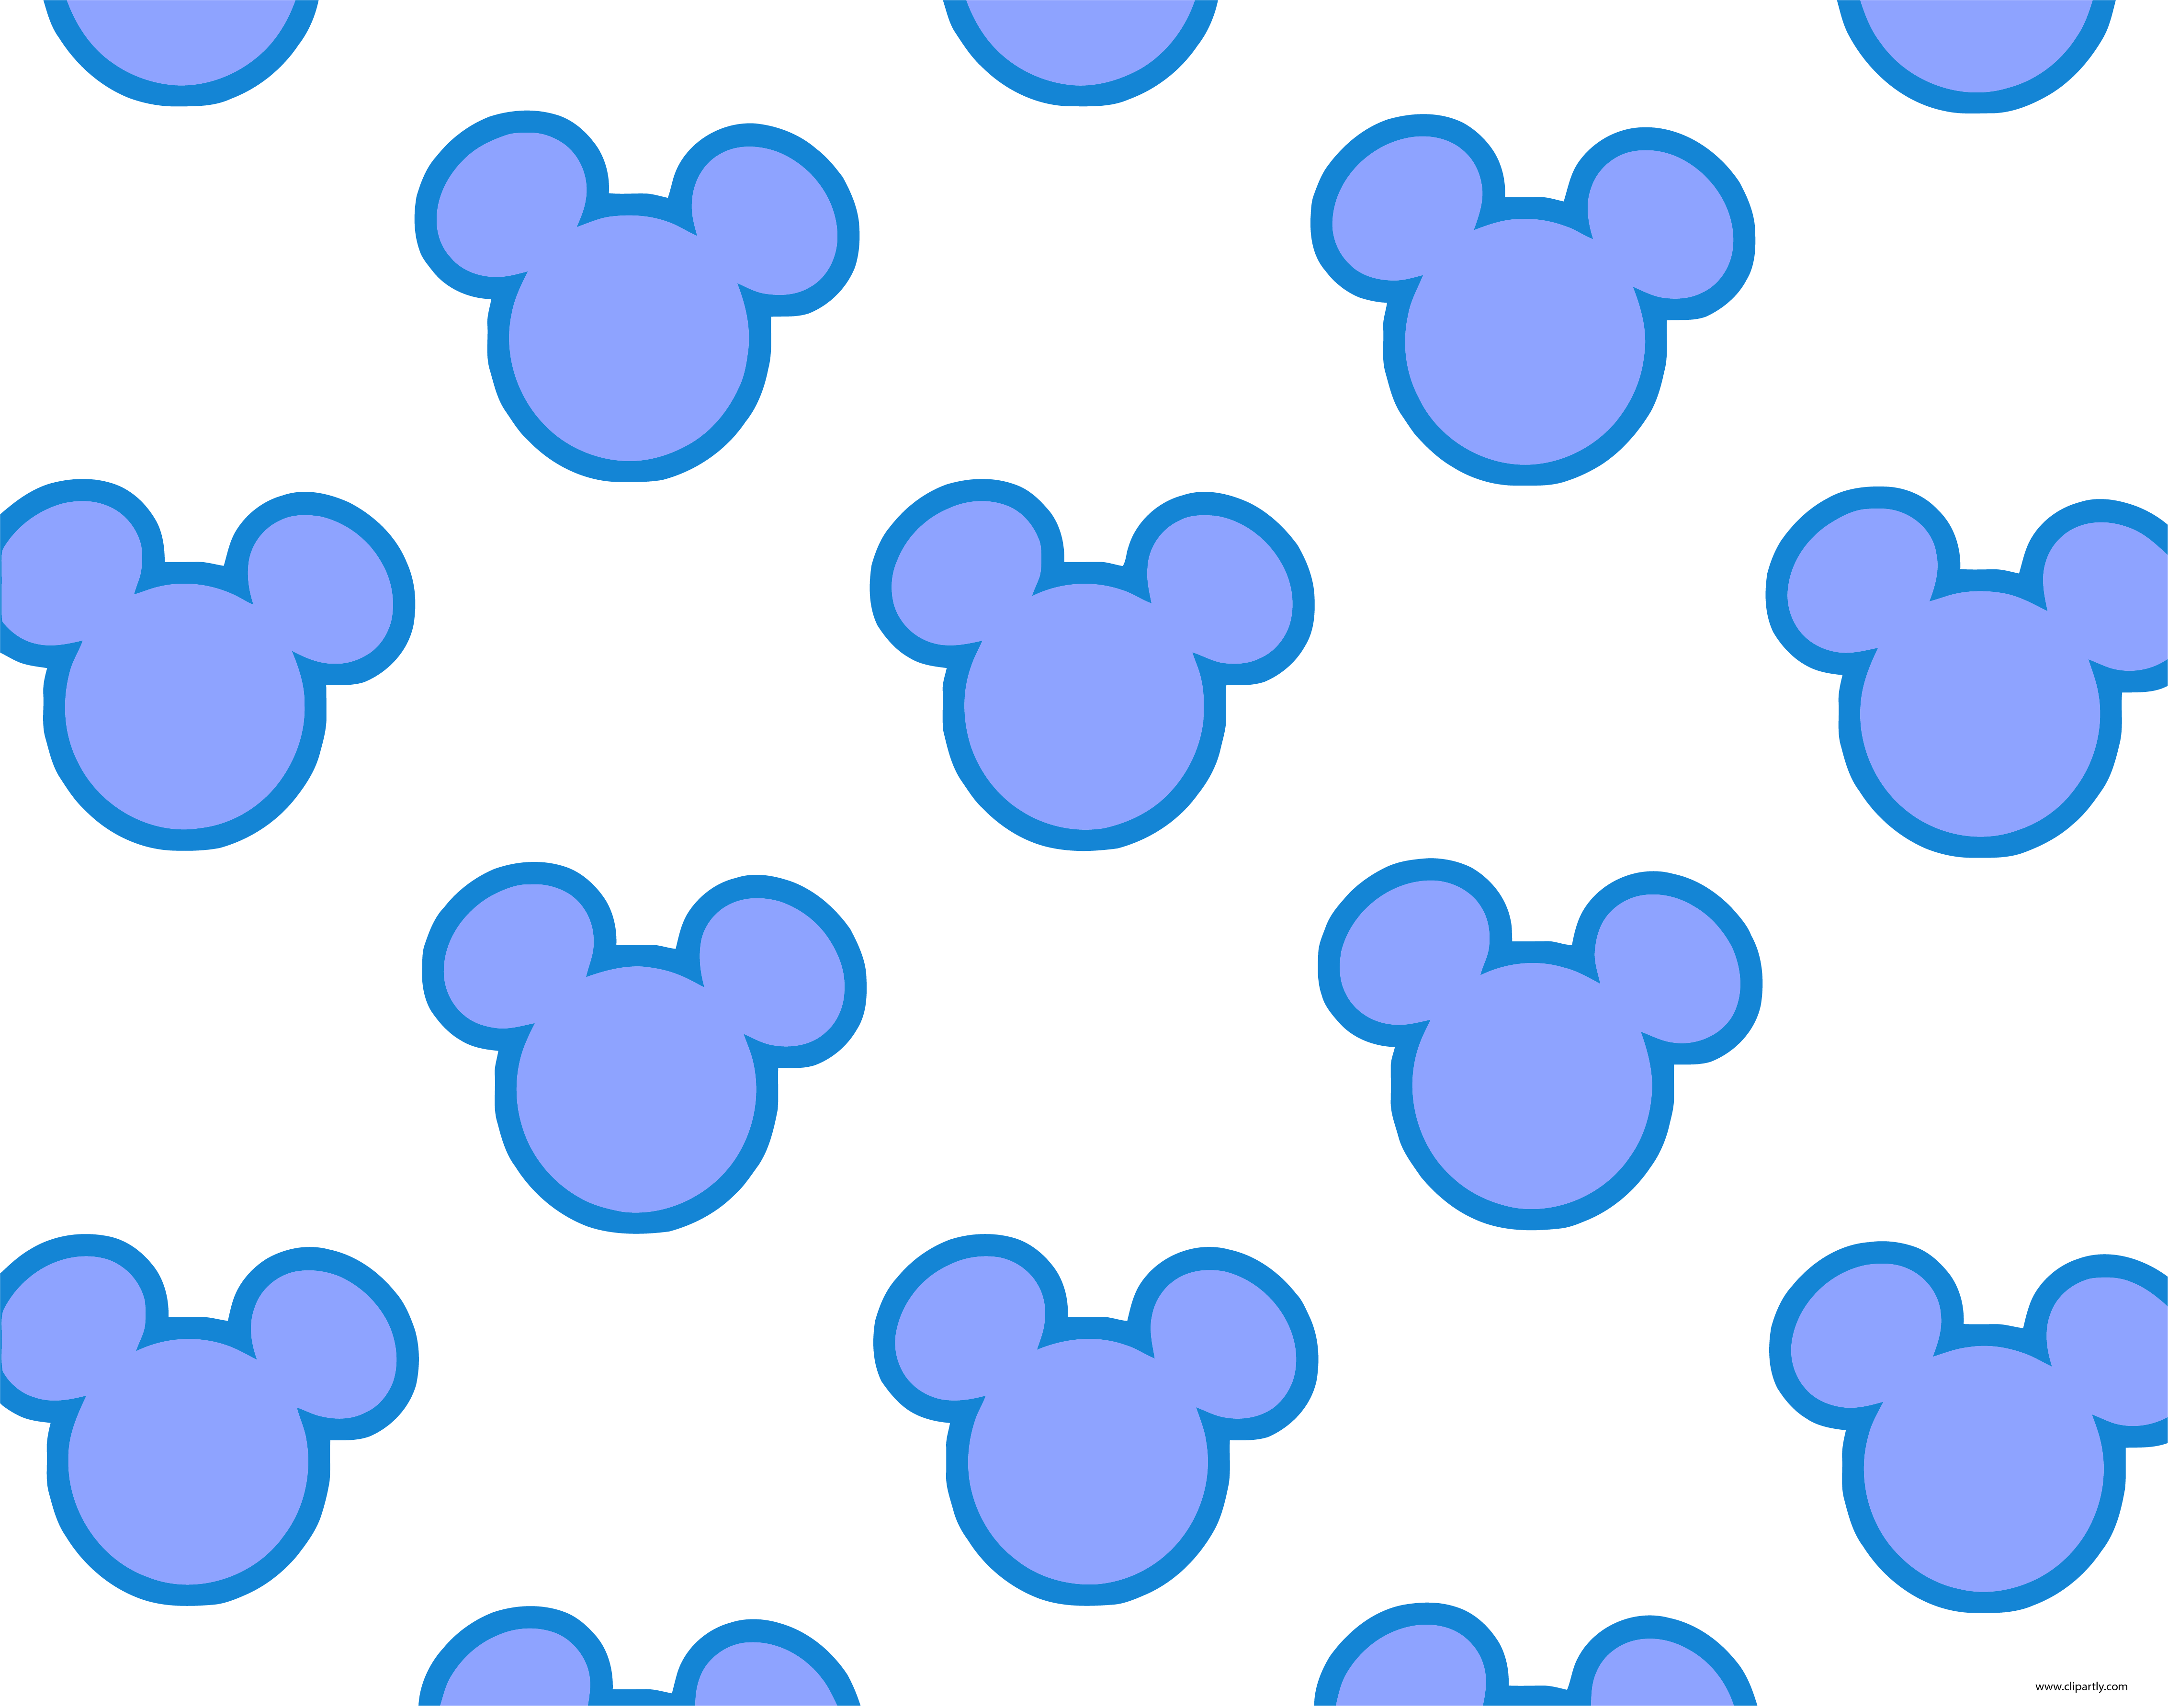 4528x3567 Mickey Mouse Head Silhouette Wallpaper